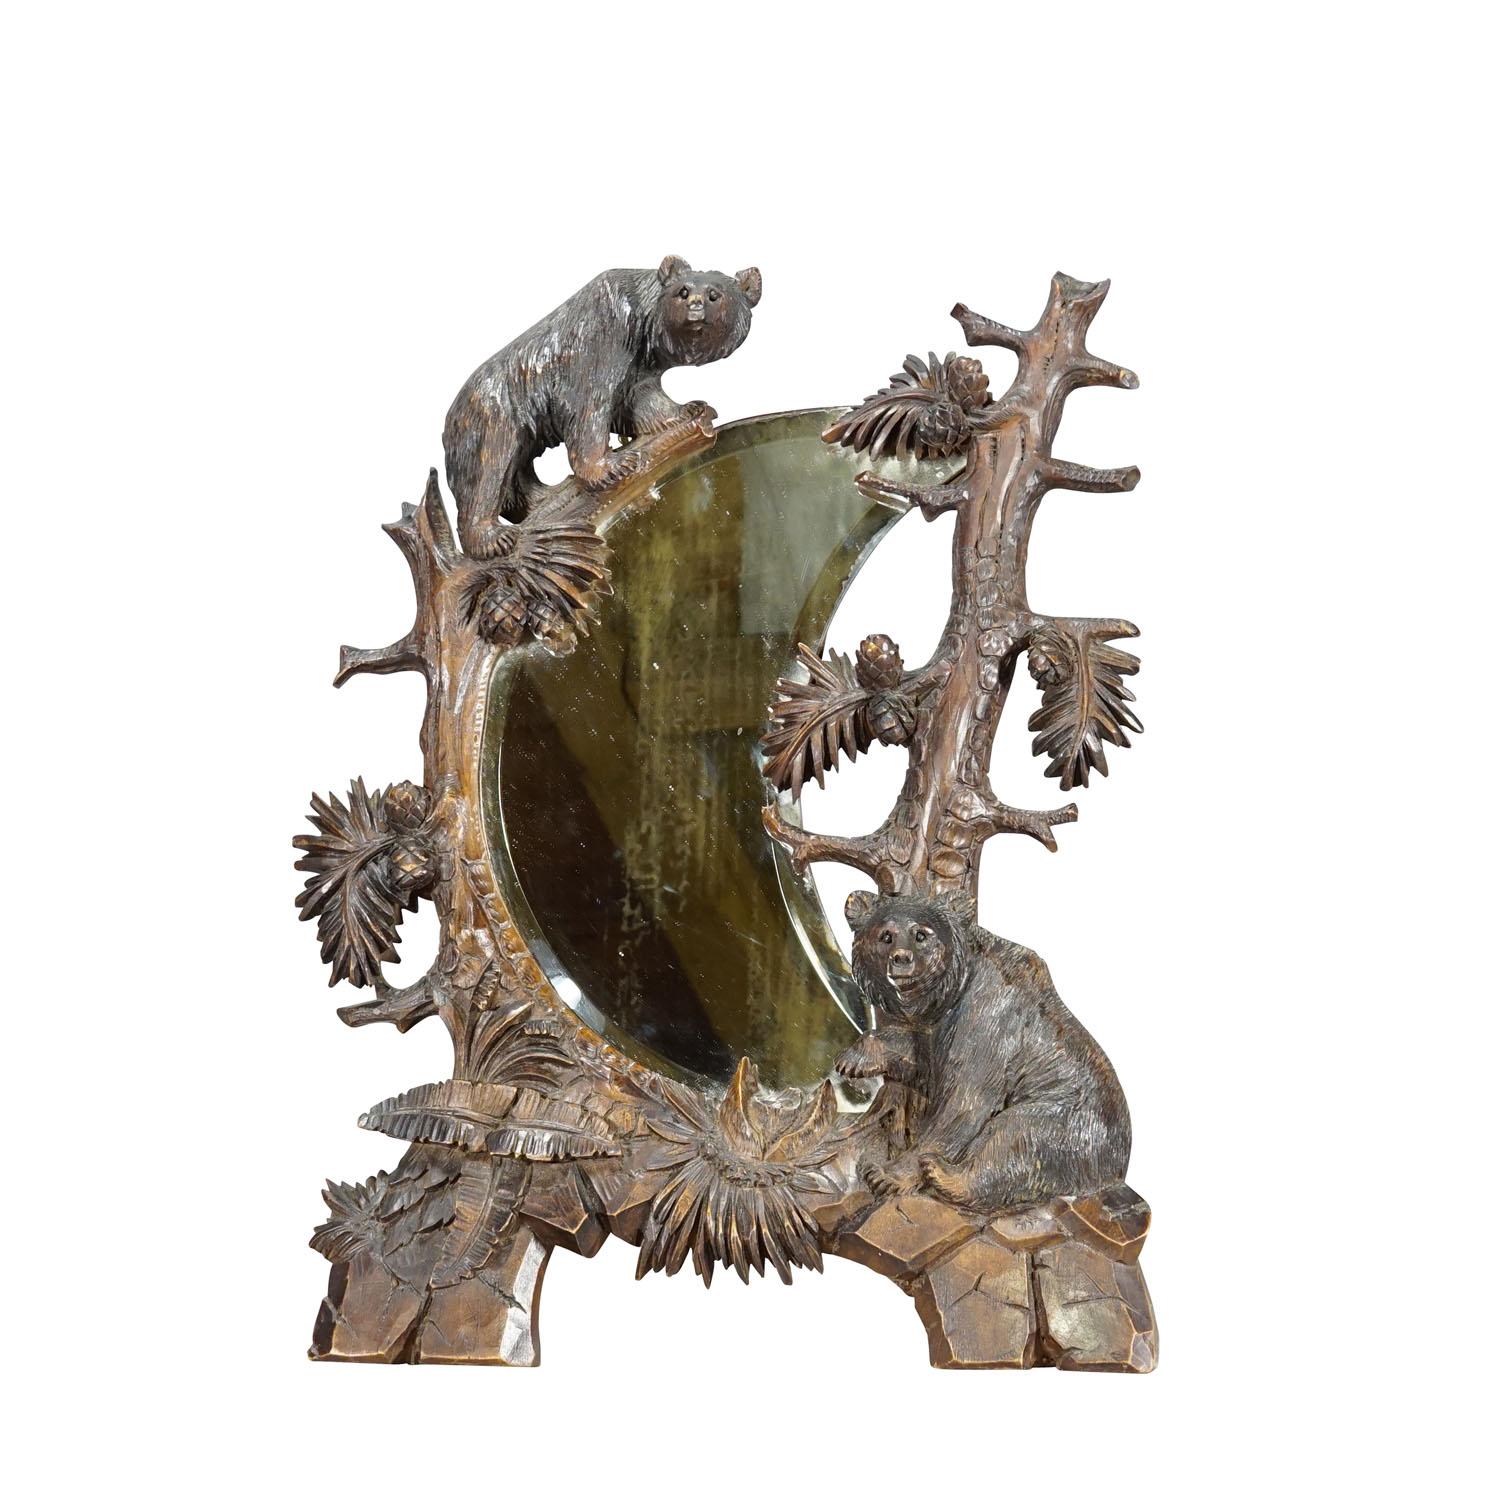 Antique black forest mirror with rustic bear carvings ca. 1900

A large crescent vanity mirror in a handcarved wooden frame featuring two bears climbing in trees. Made in Switzerland circa 1900s. Very good condition, mirror slighly clowdy. The stand